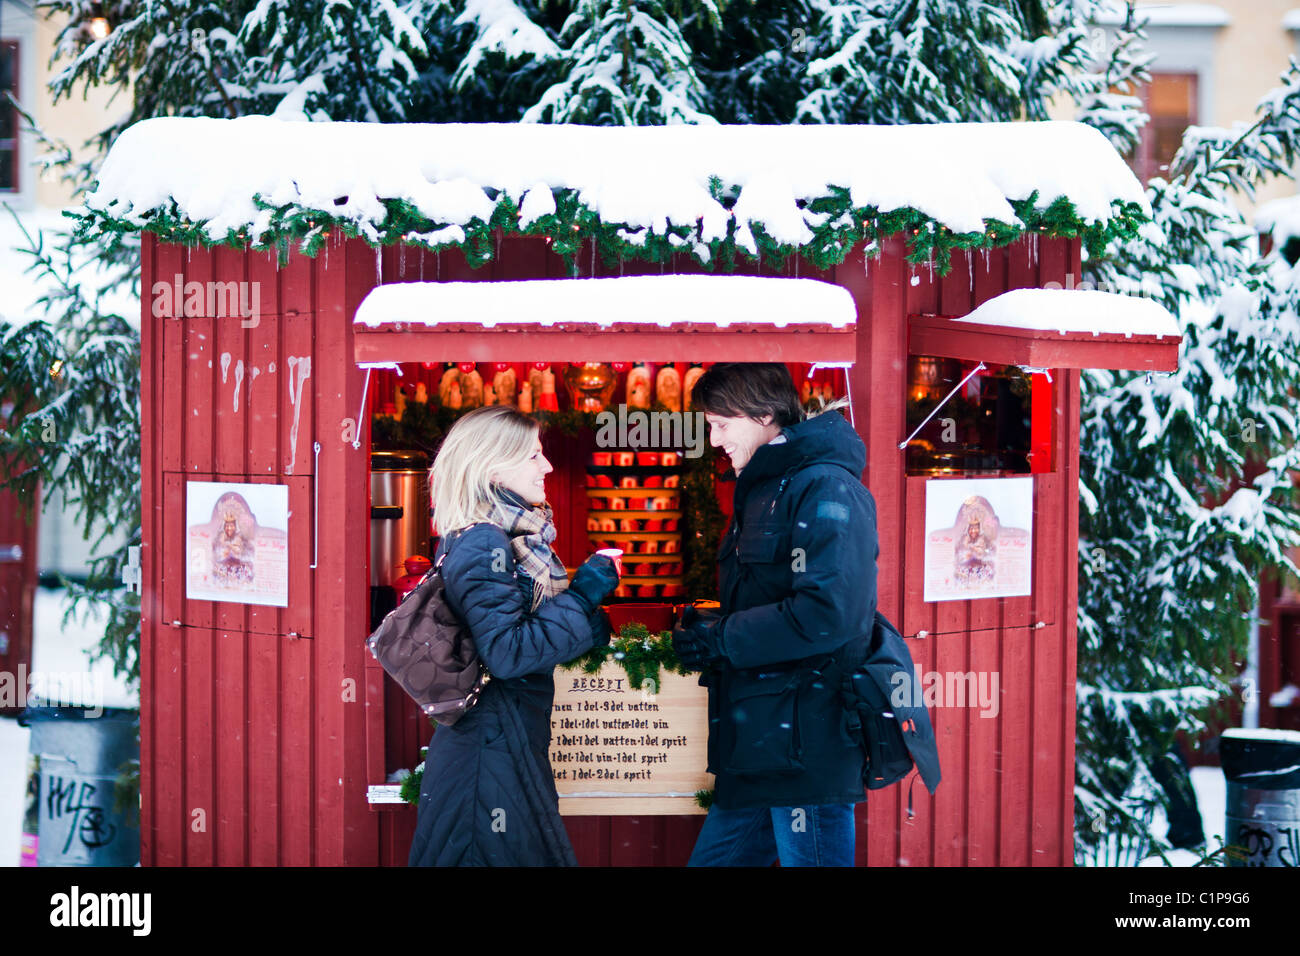 Couple standing in front of food stall in snow Stock Photo